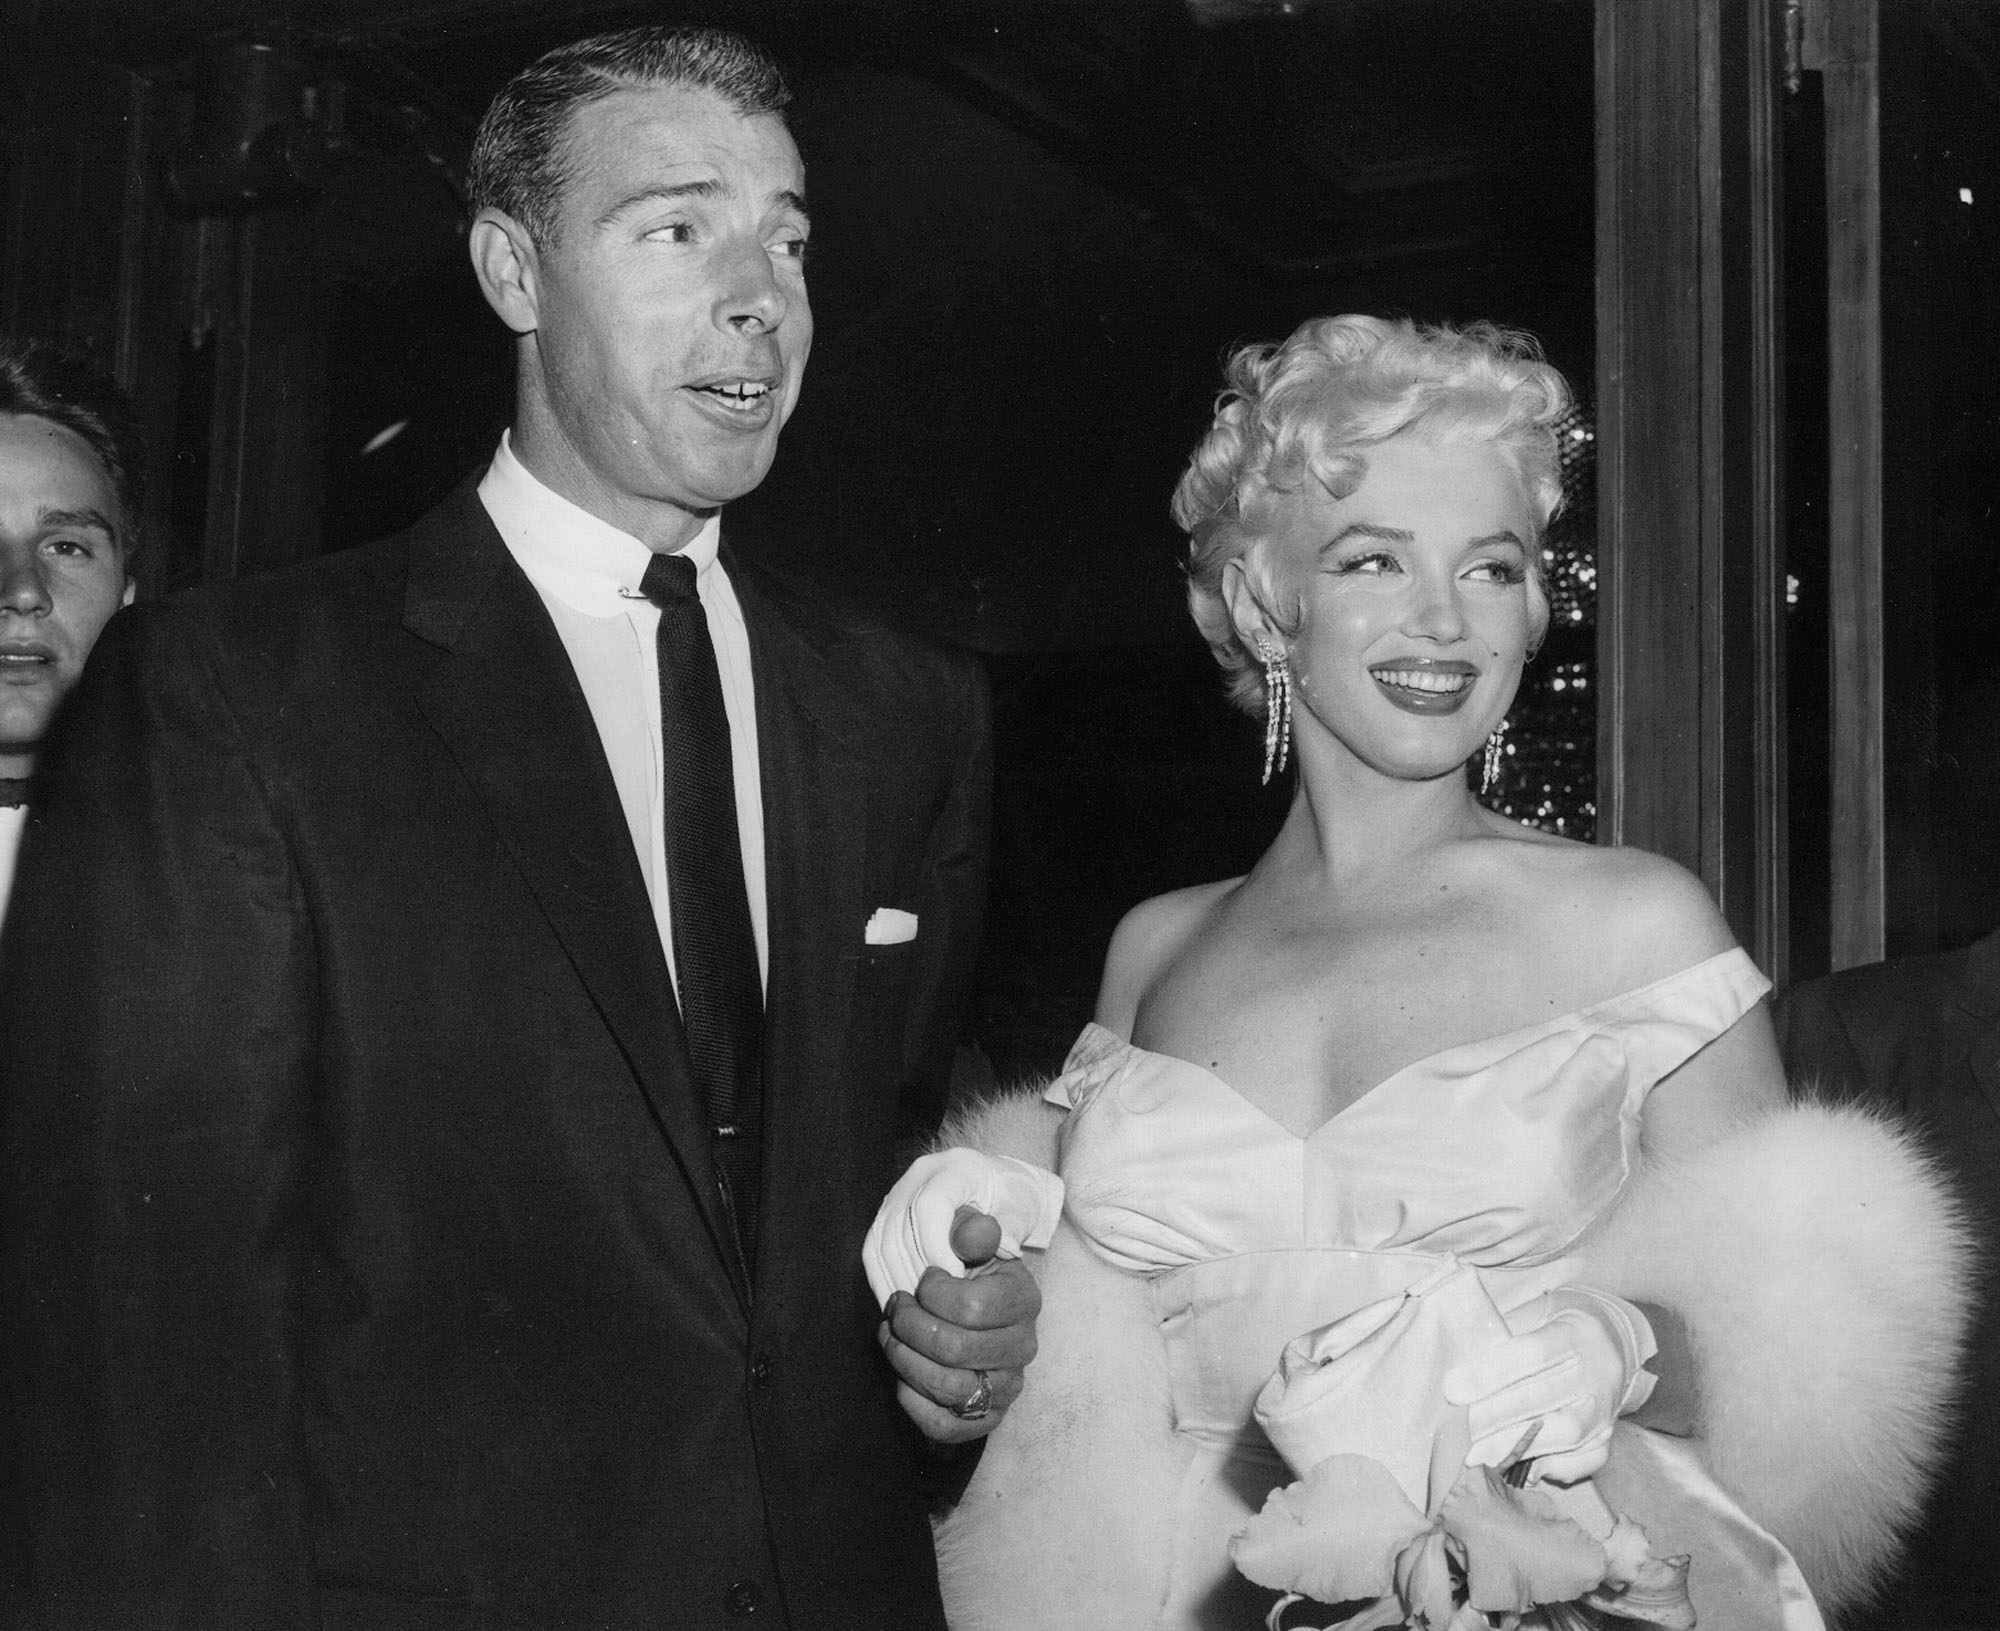 In this June 2, 1955 file photo, actress Marilyn Monroe, right, dressed in a glamorous evening gown, arrives with Joe DiMaggio at the theater. (Associated Press)